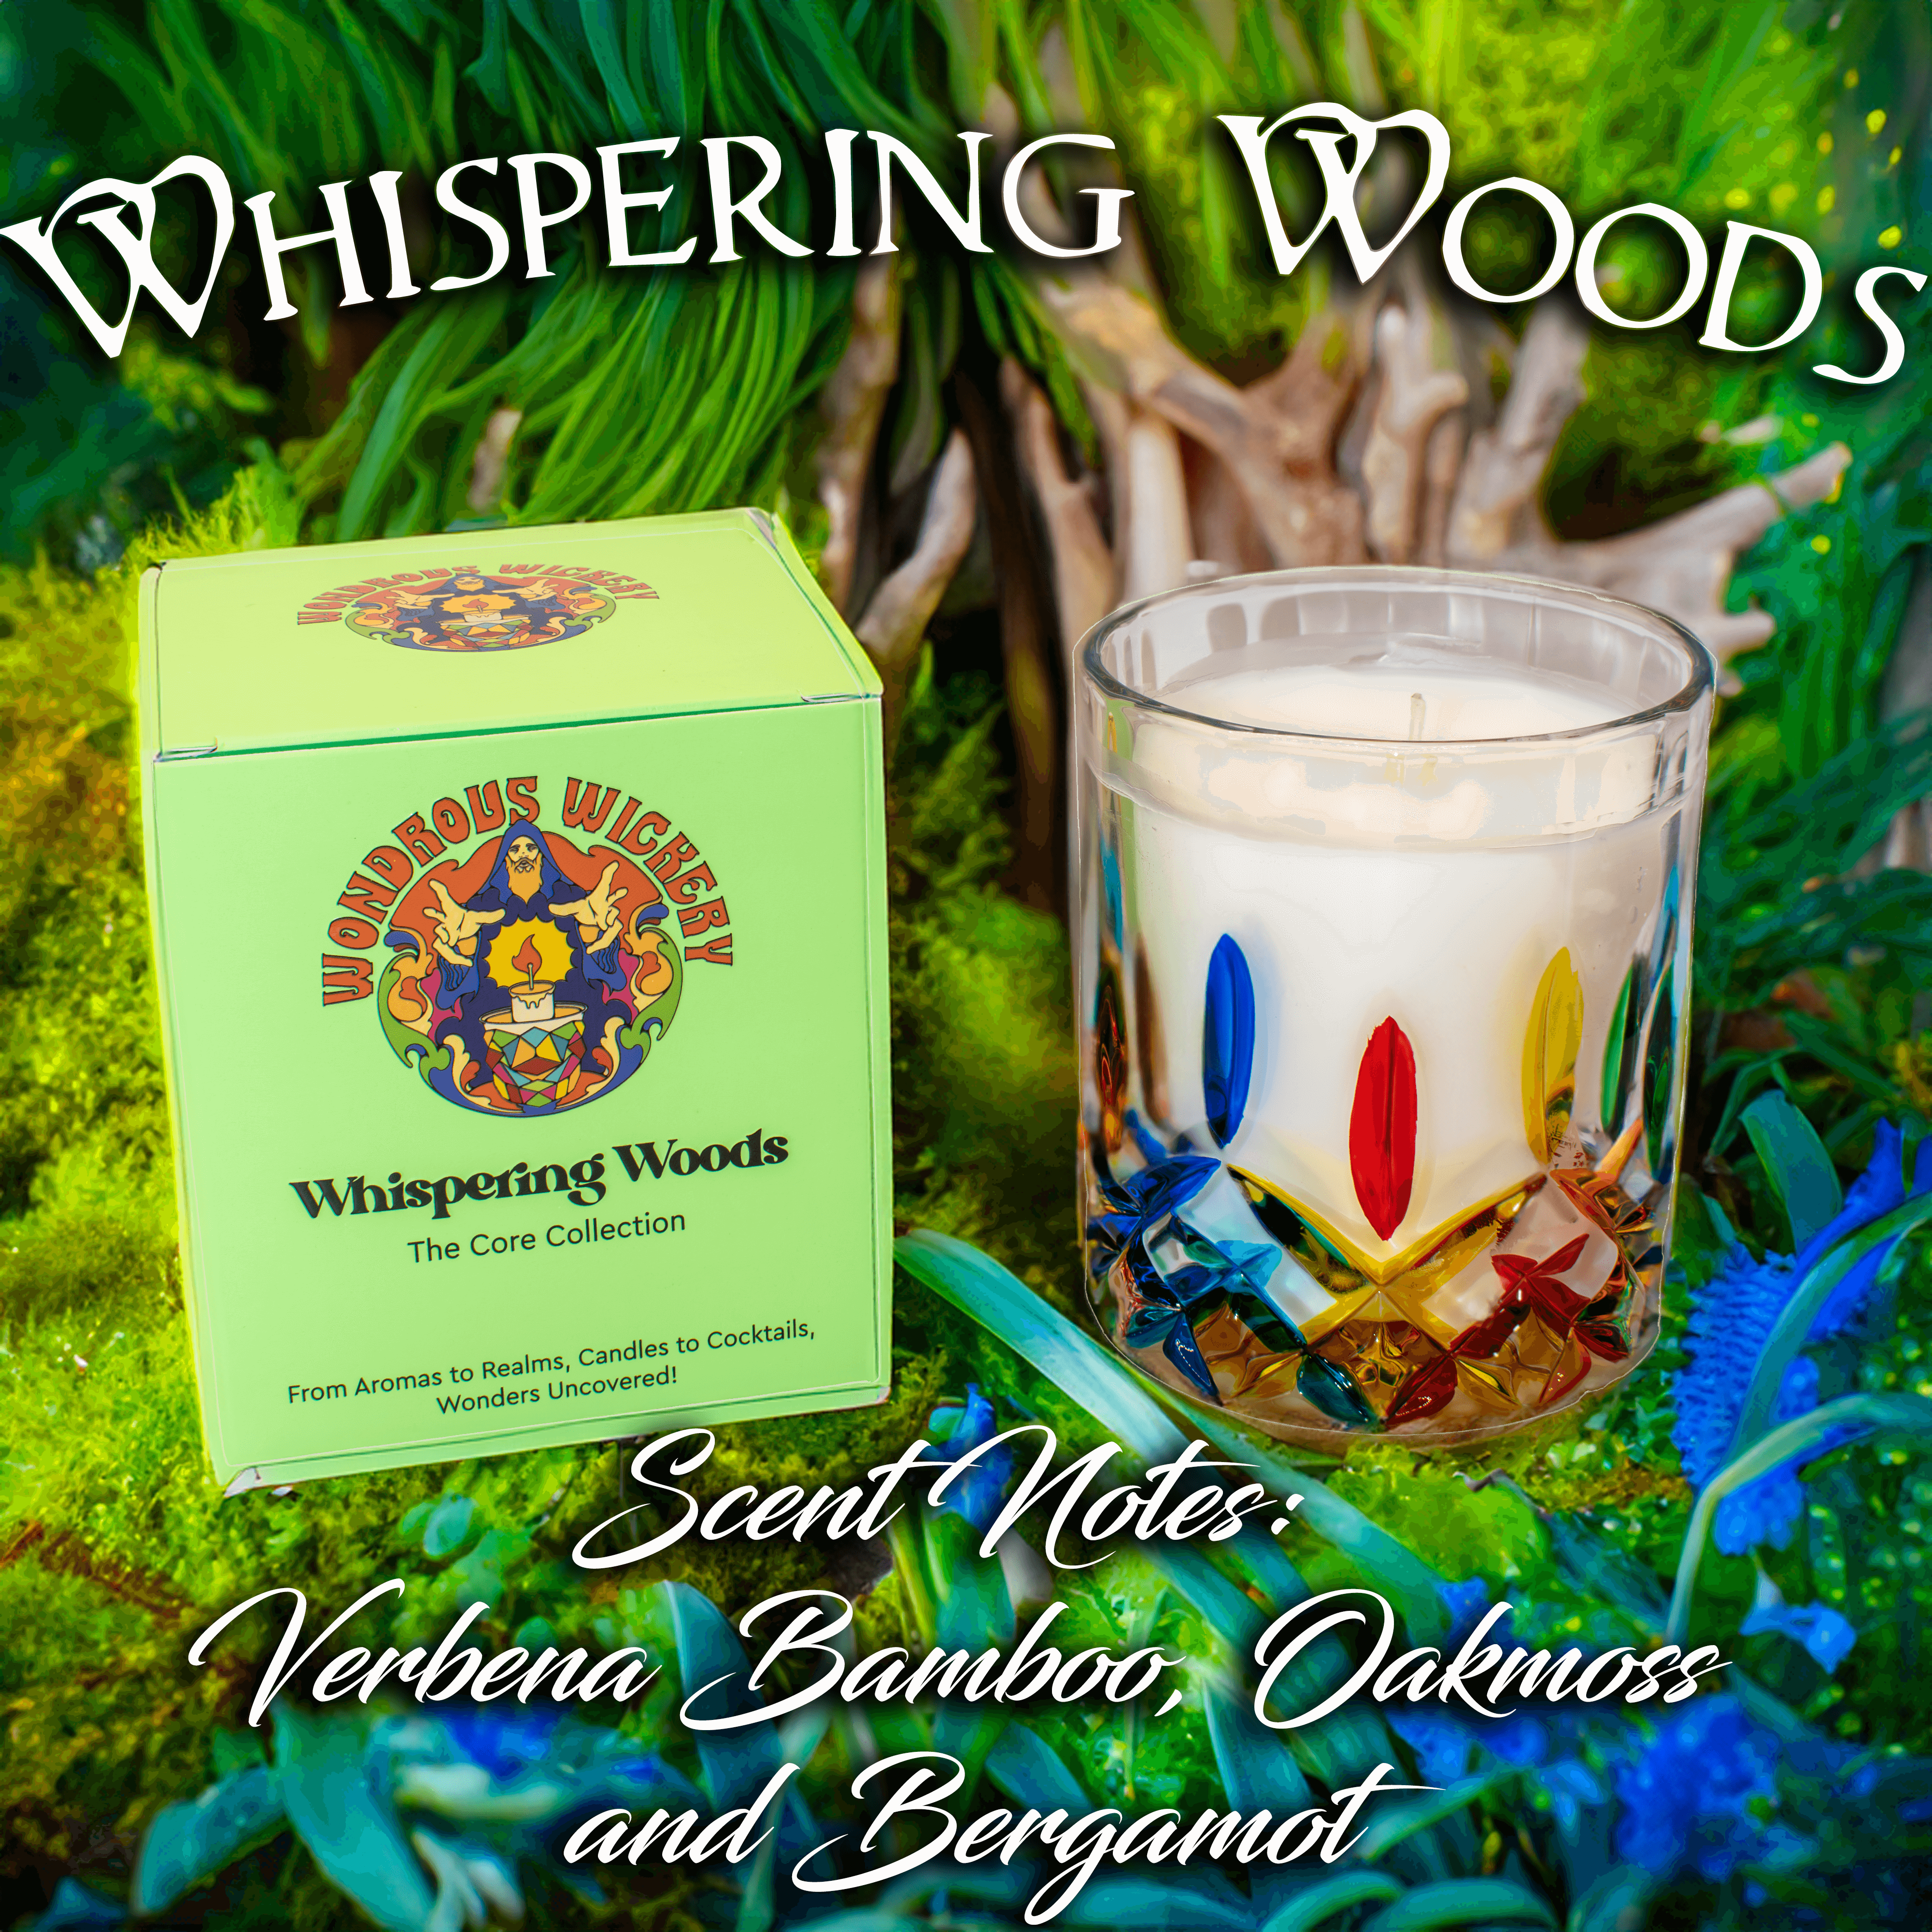 Whispering Woods Candle / Candle to Cocktail Experience / Core Collection / Hand Crafted / Unique Candle Gift - undefined - Wondrous Wickery